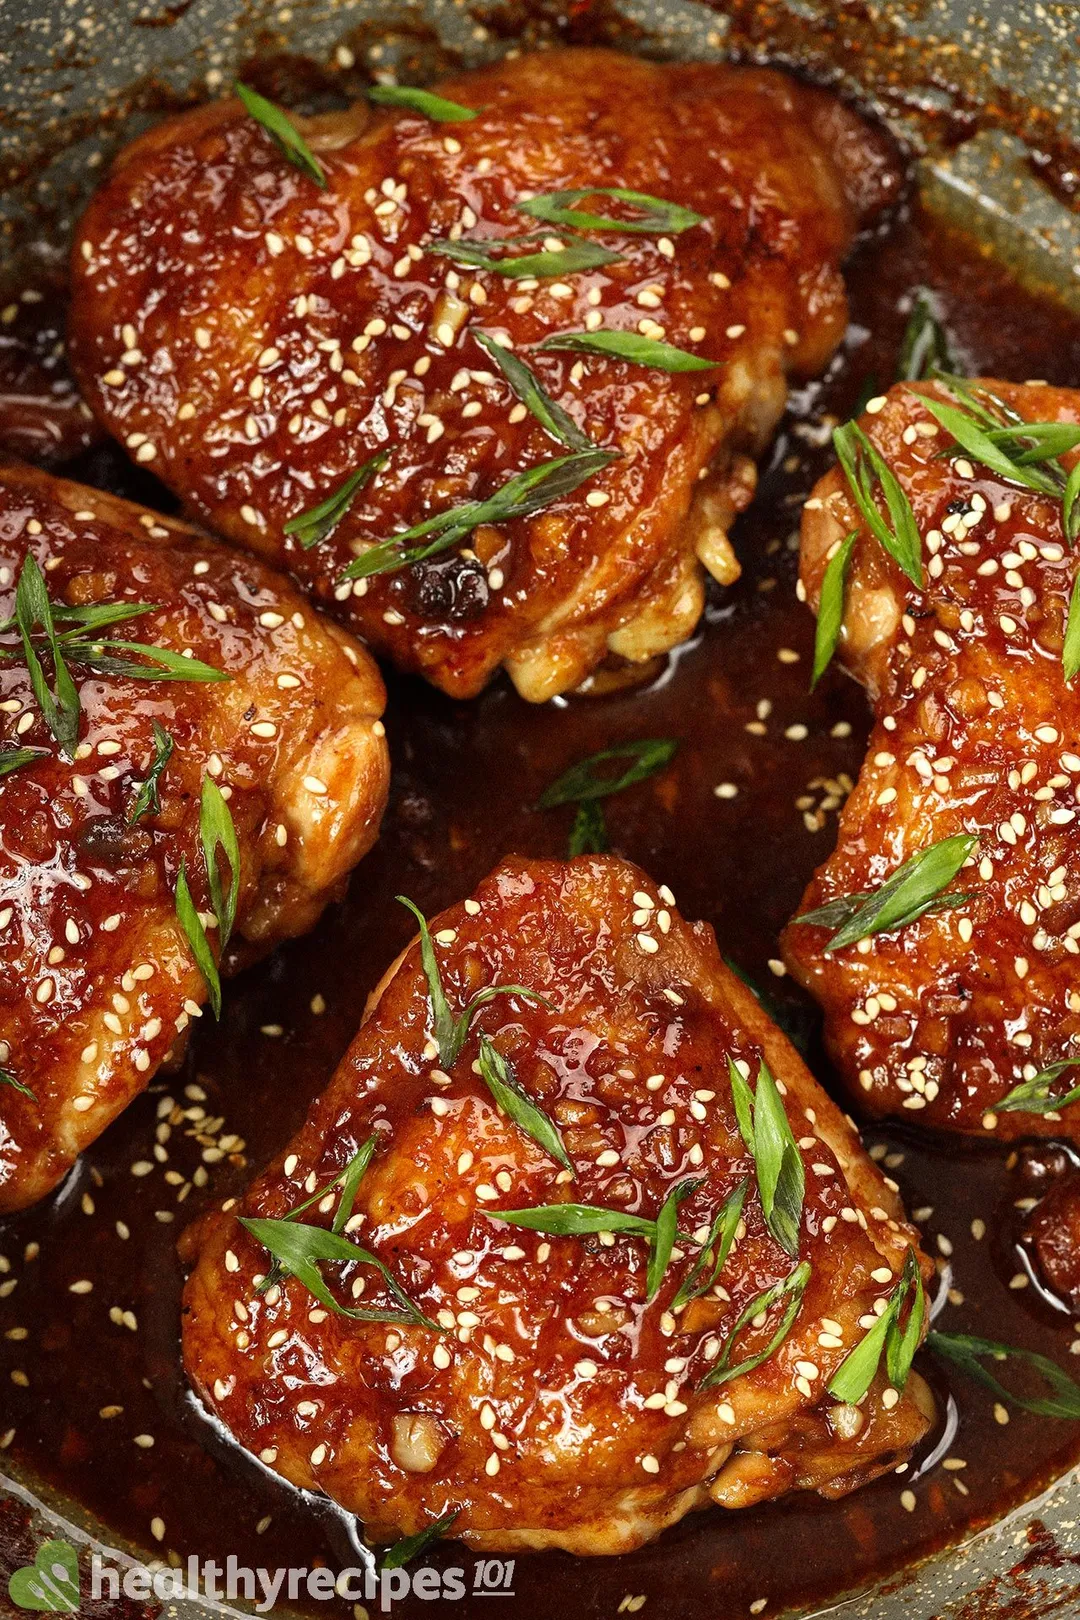 Pieces of cooked and browned chicken thighs covered in white sesame seeds and chopped scallions with a thick and glossy dark brown miso sauce underneath